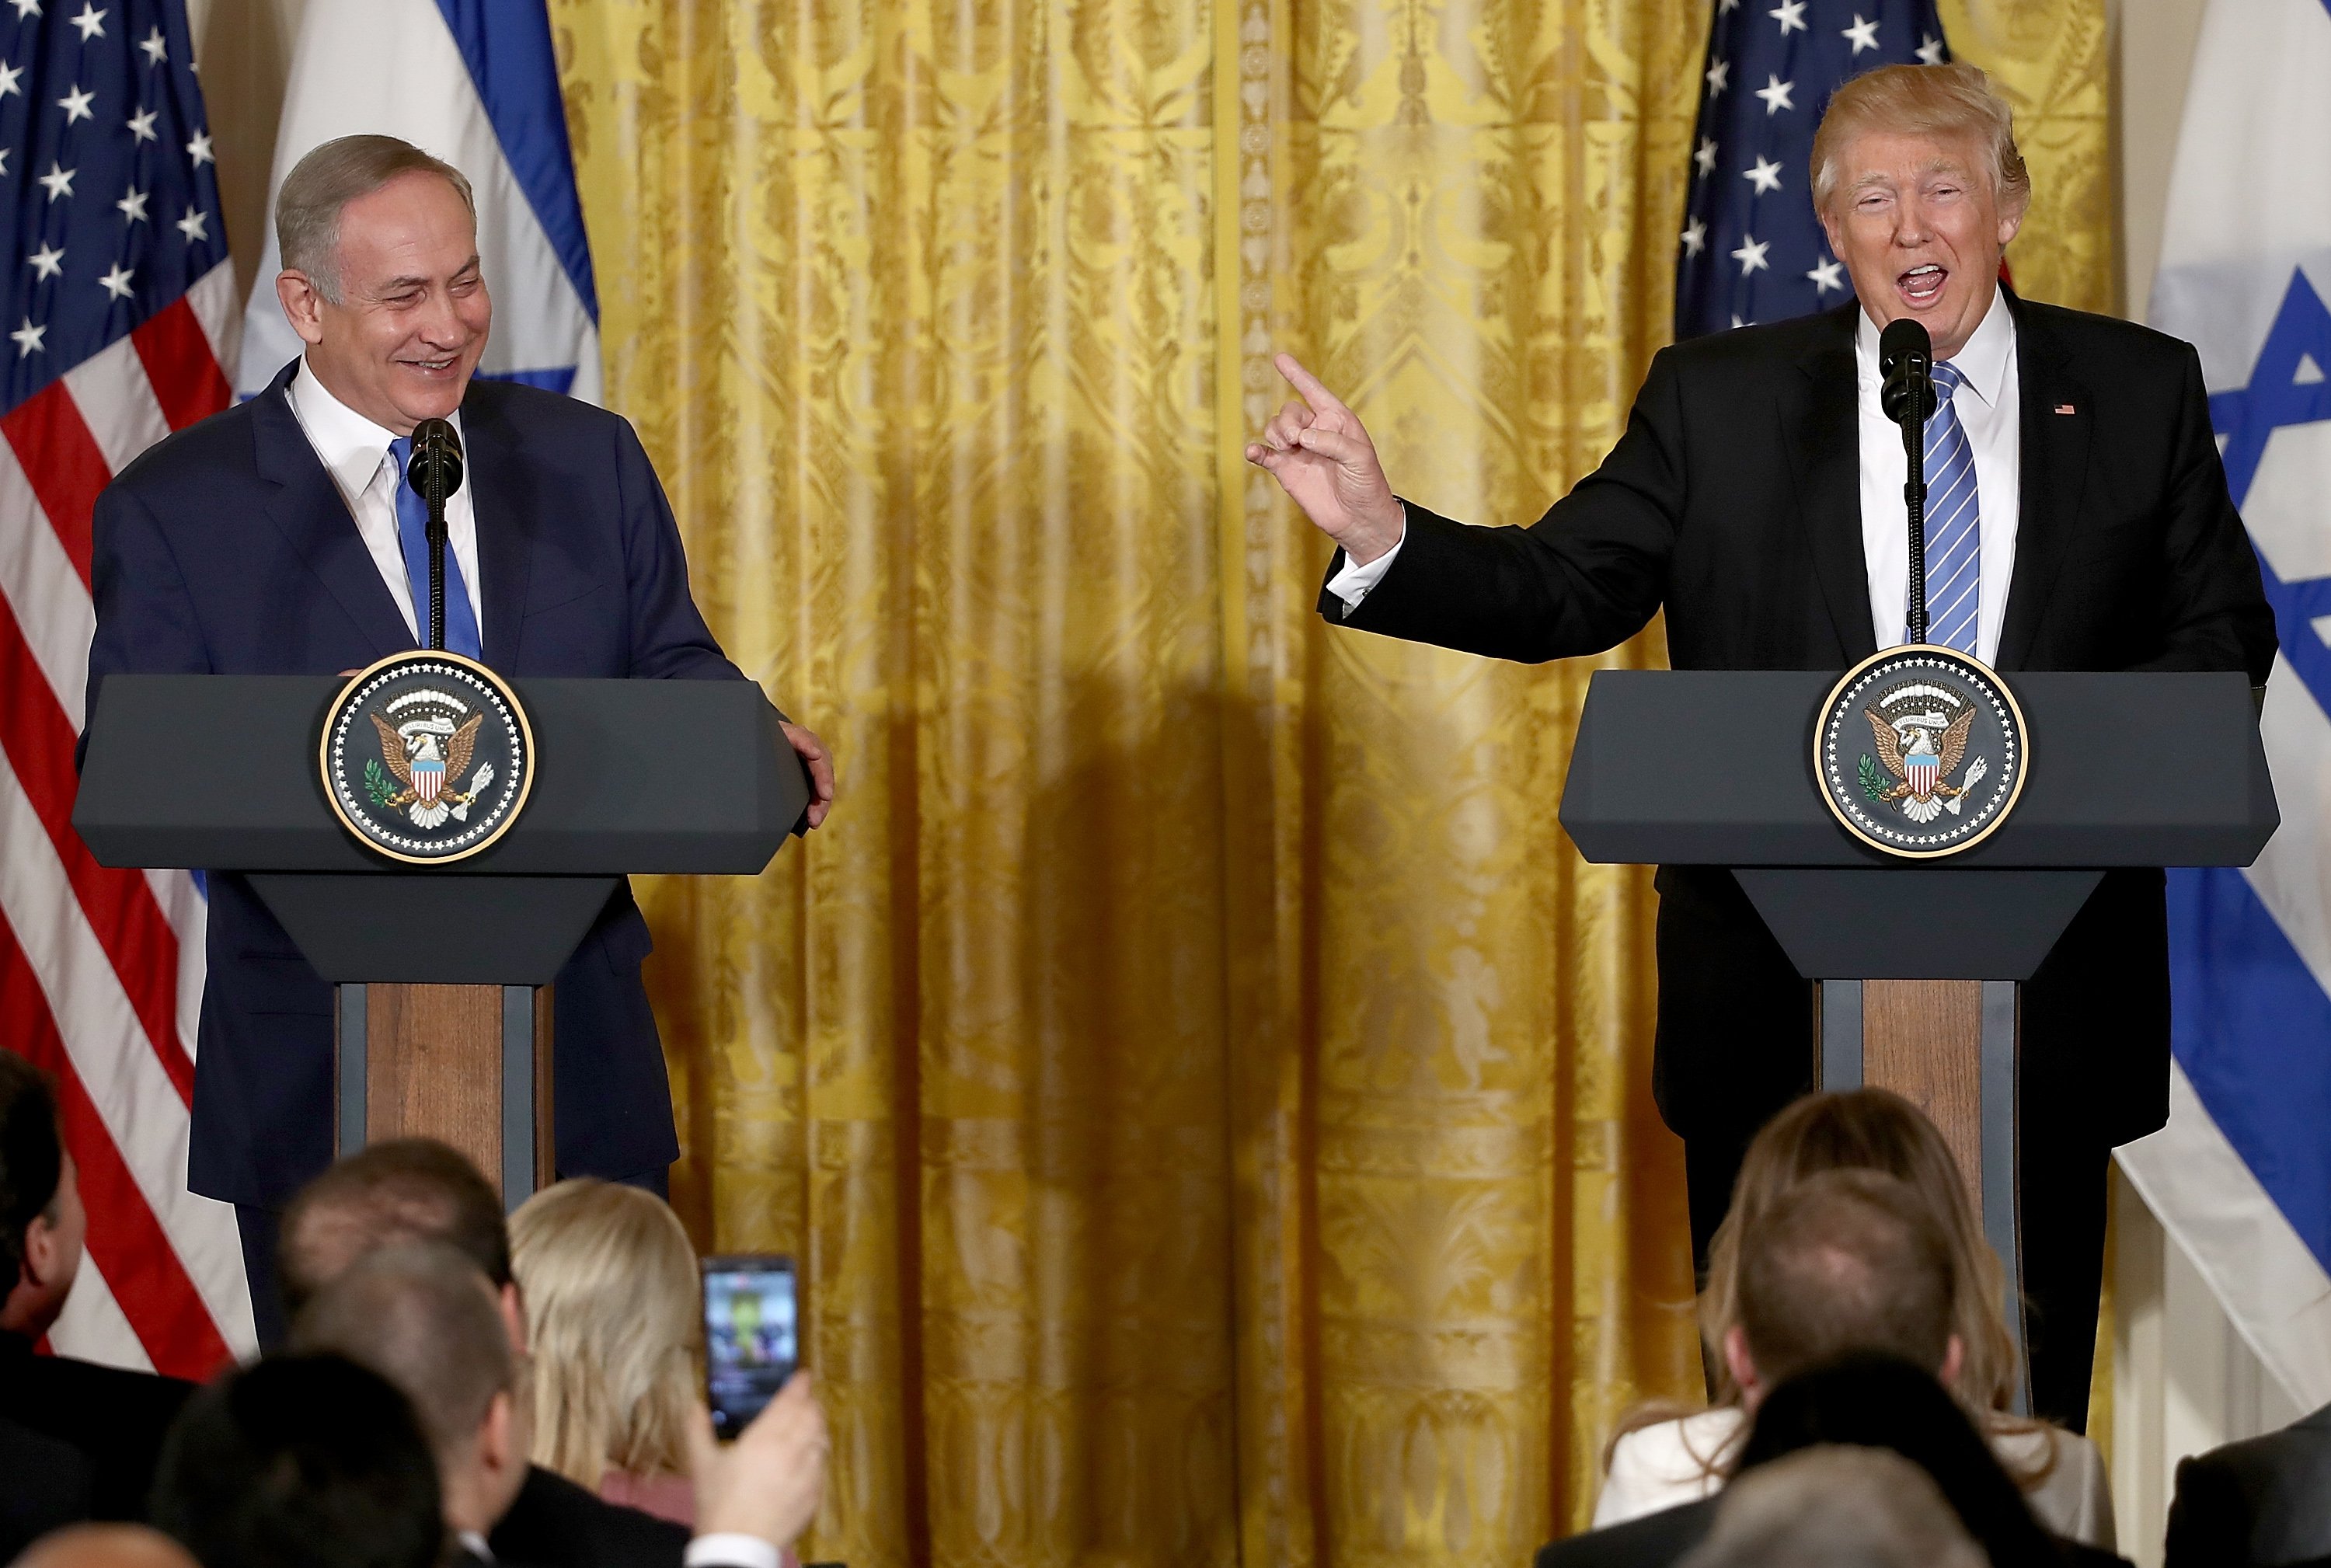 U.S. President Donald Trump (R) and Israel Prime Minister Benjamin Netanyahu (L) answer questions during a joint news conference in the East Room of the White House February 15, 2017 in Washington, DC ... (Photo by Win McNamee/Getty Images)